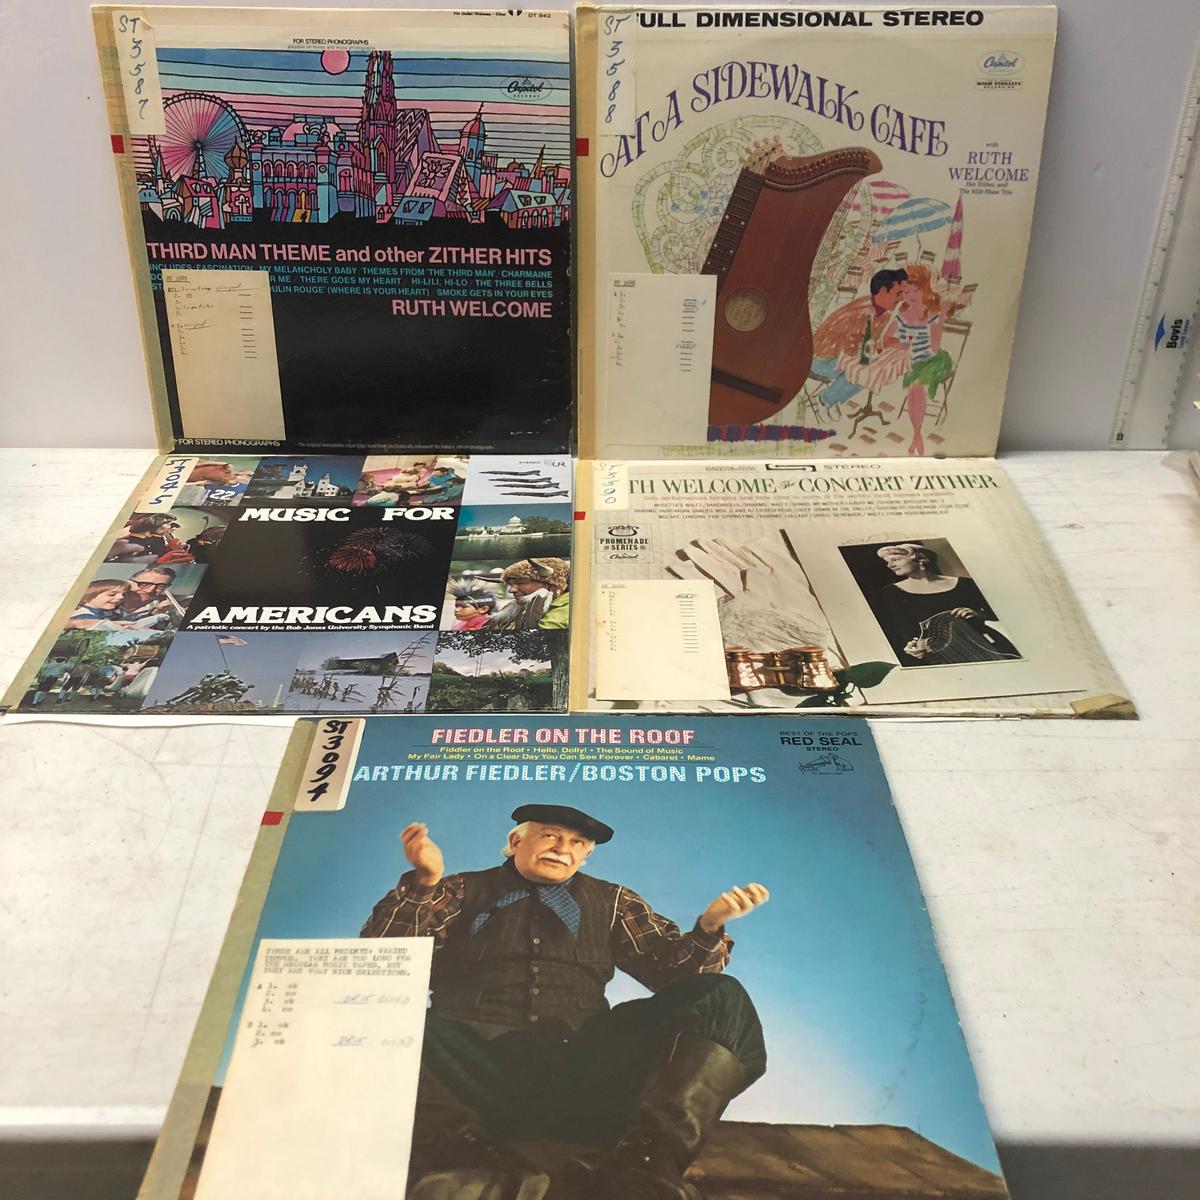 Fiedler on the Roof by Arthur Fiedler and Boston Pops and More Record Albums Lot of 5